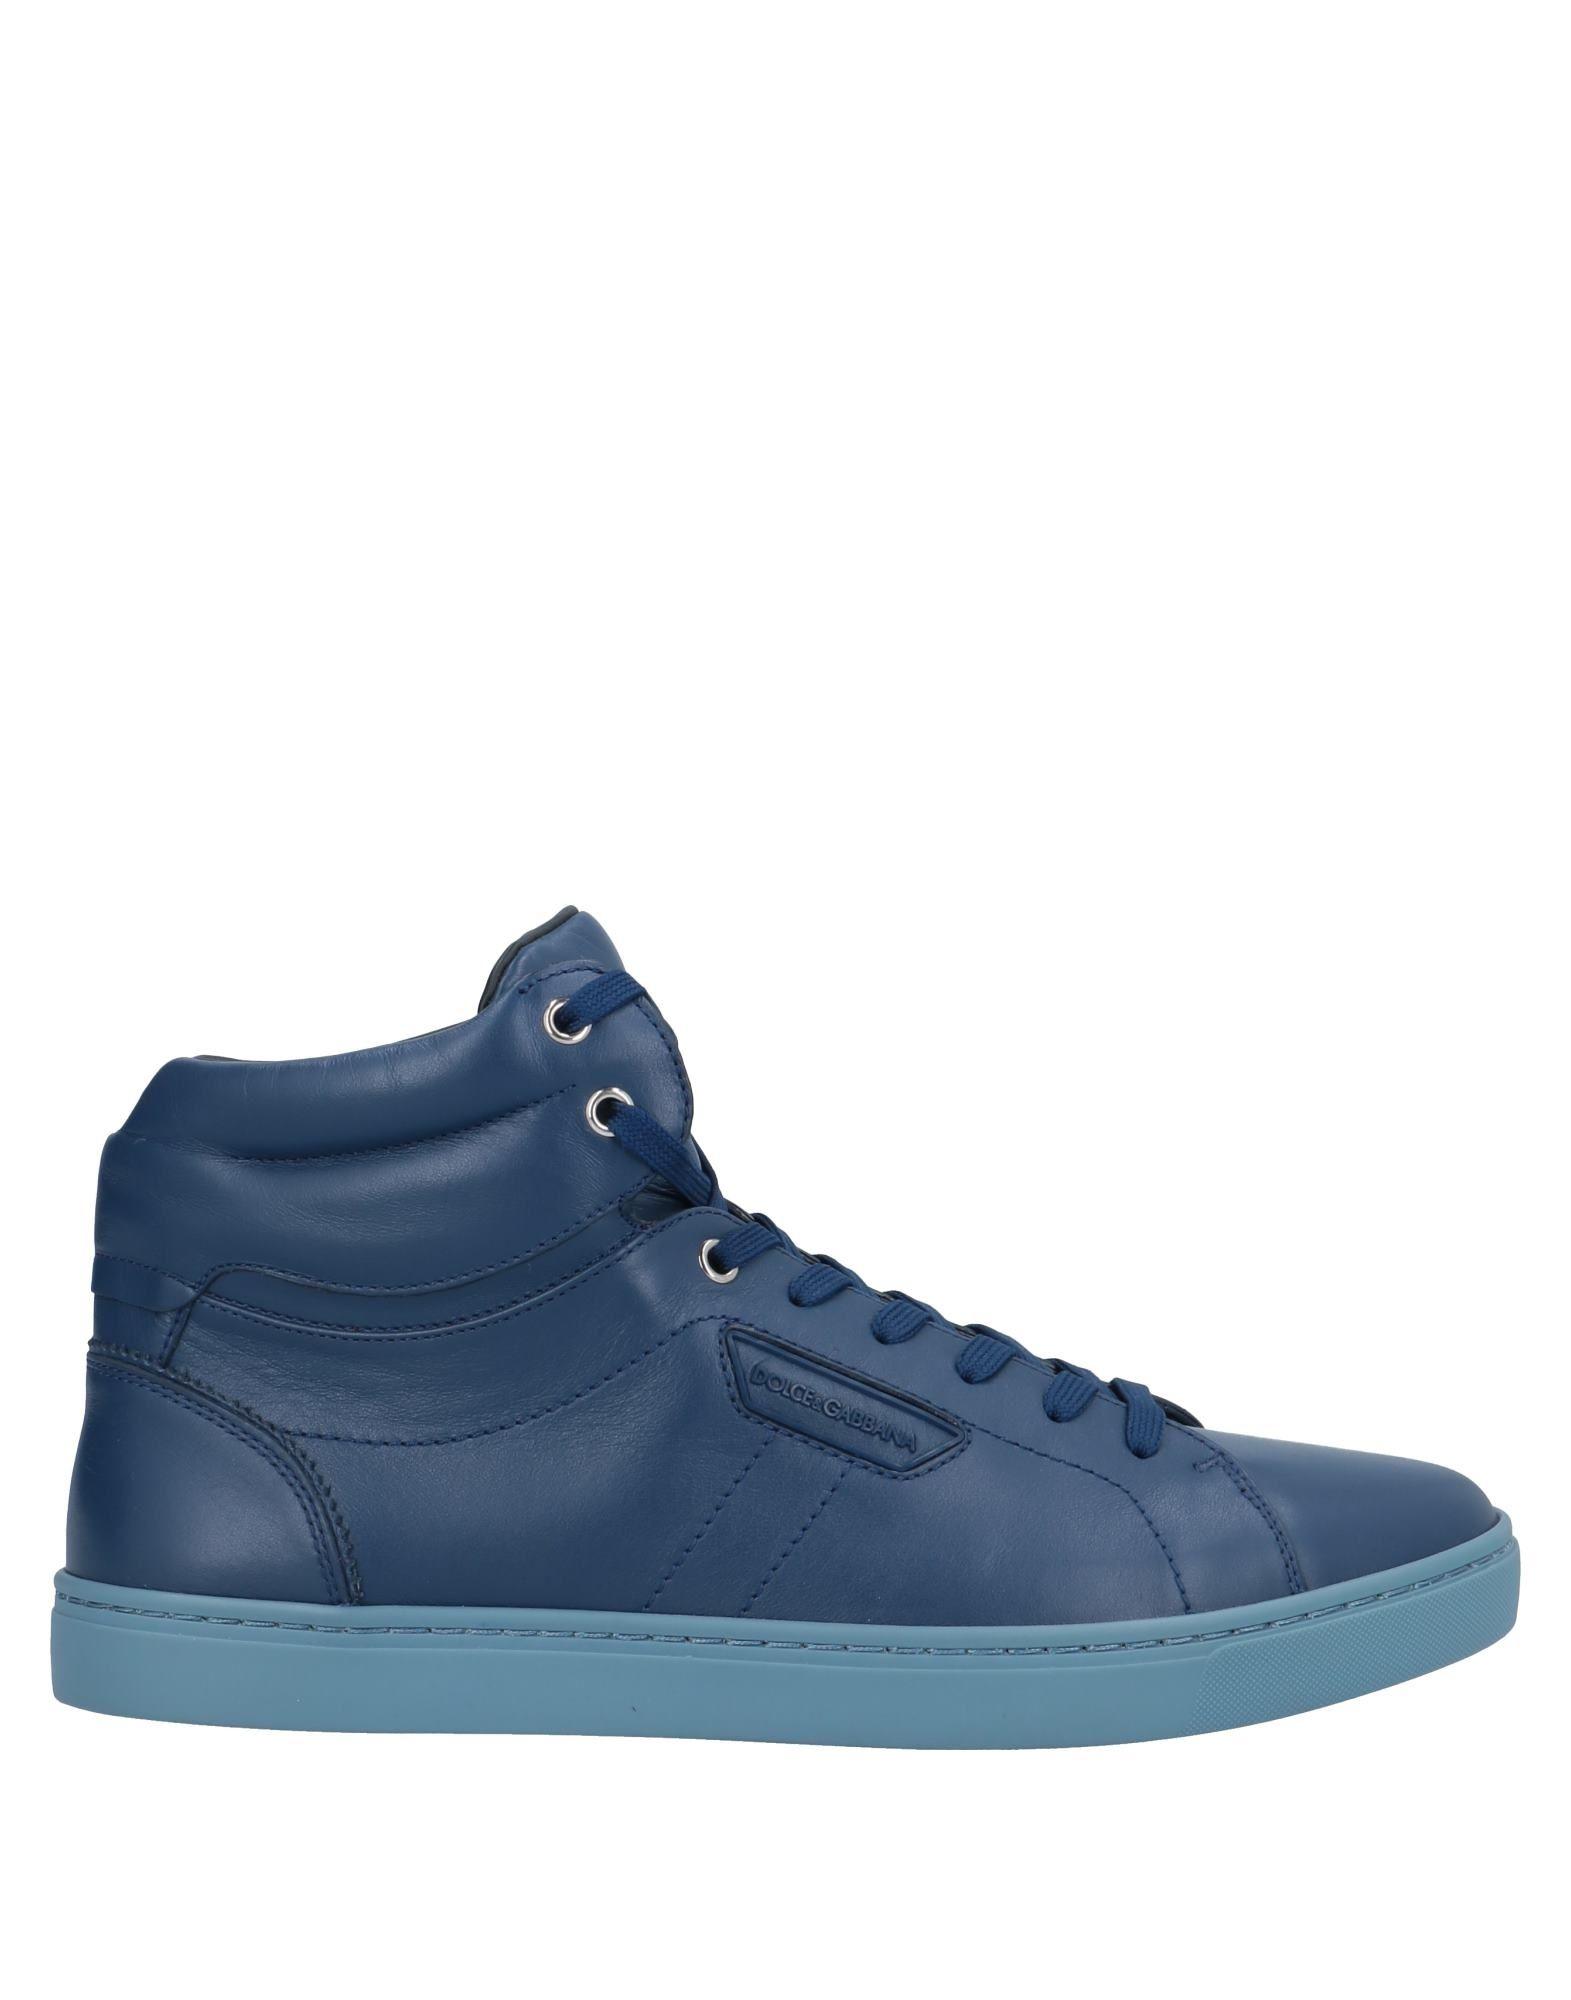 Dolce & Gabbana Leather High-tops & Sneakers in Blue for Men - Lyst